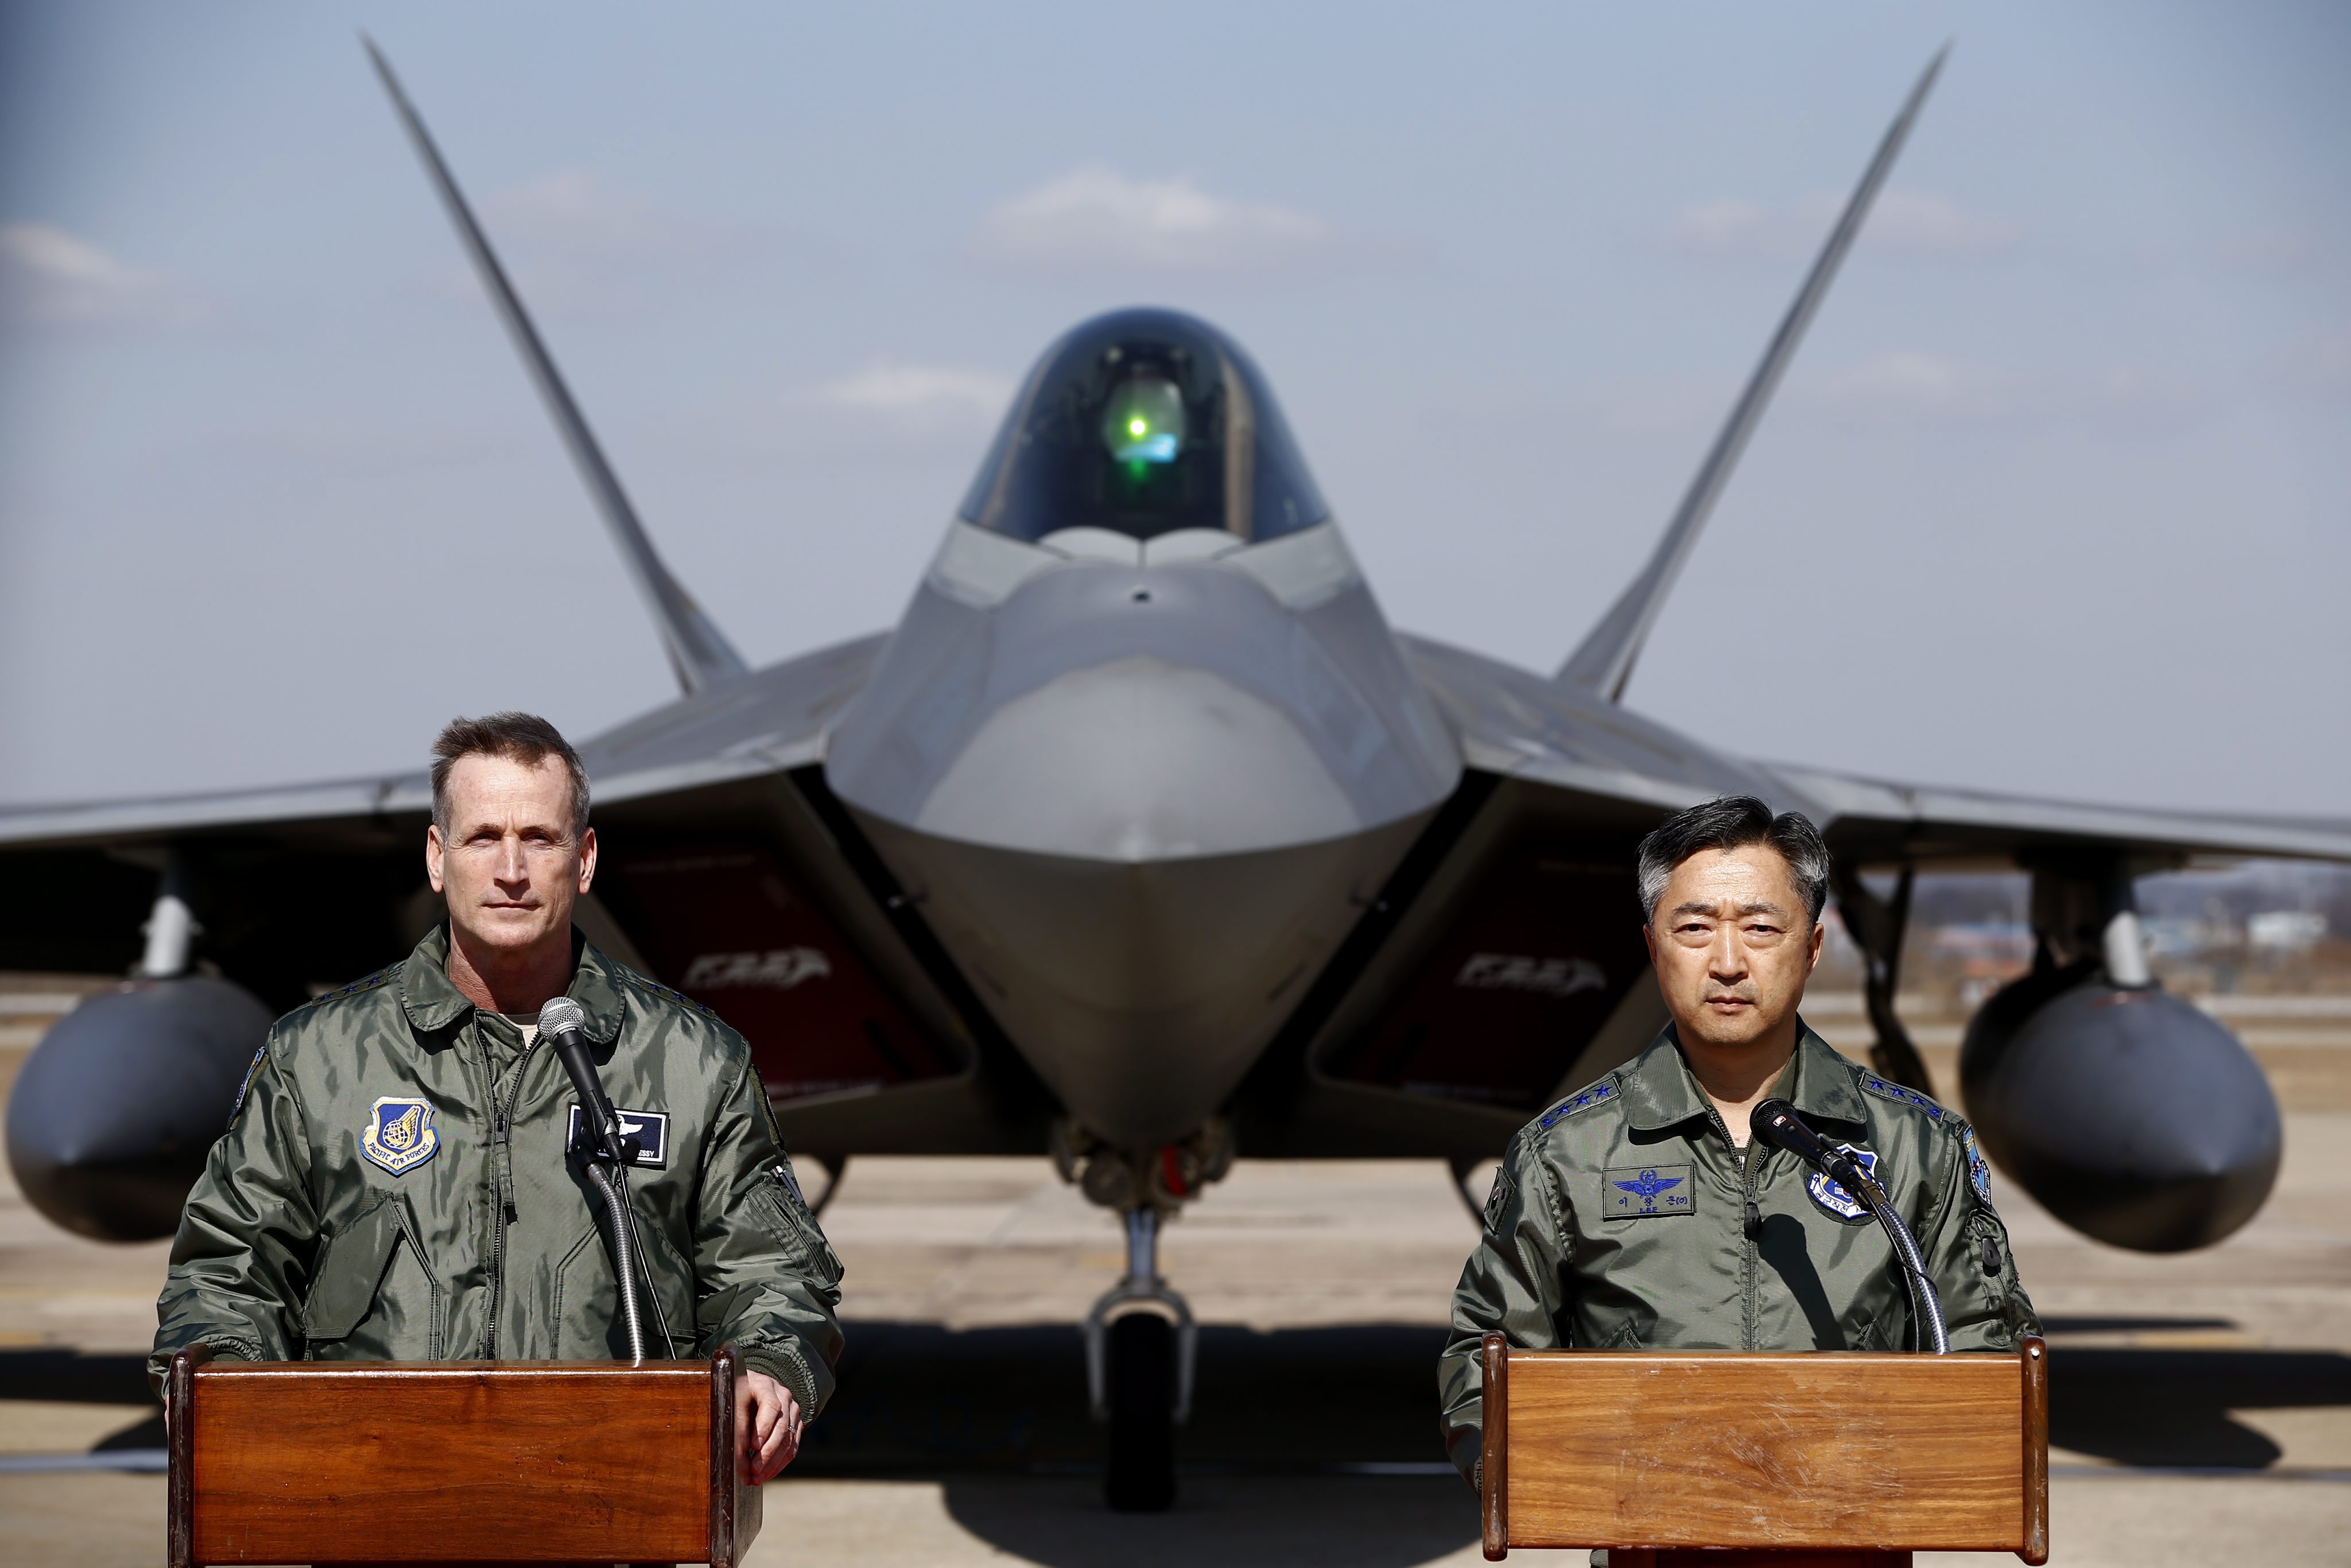 US Lieutenant General Terrence O’Shaughnessy, deputy commander of the US Forces Korea, and Lee Wang-geun, commander at South Korea’s Air Force Operations, speak in front of a F-22 stealth fighter during a press briefing in South Korea. Photo: EPA